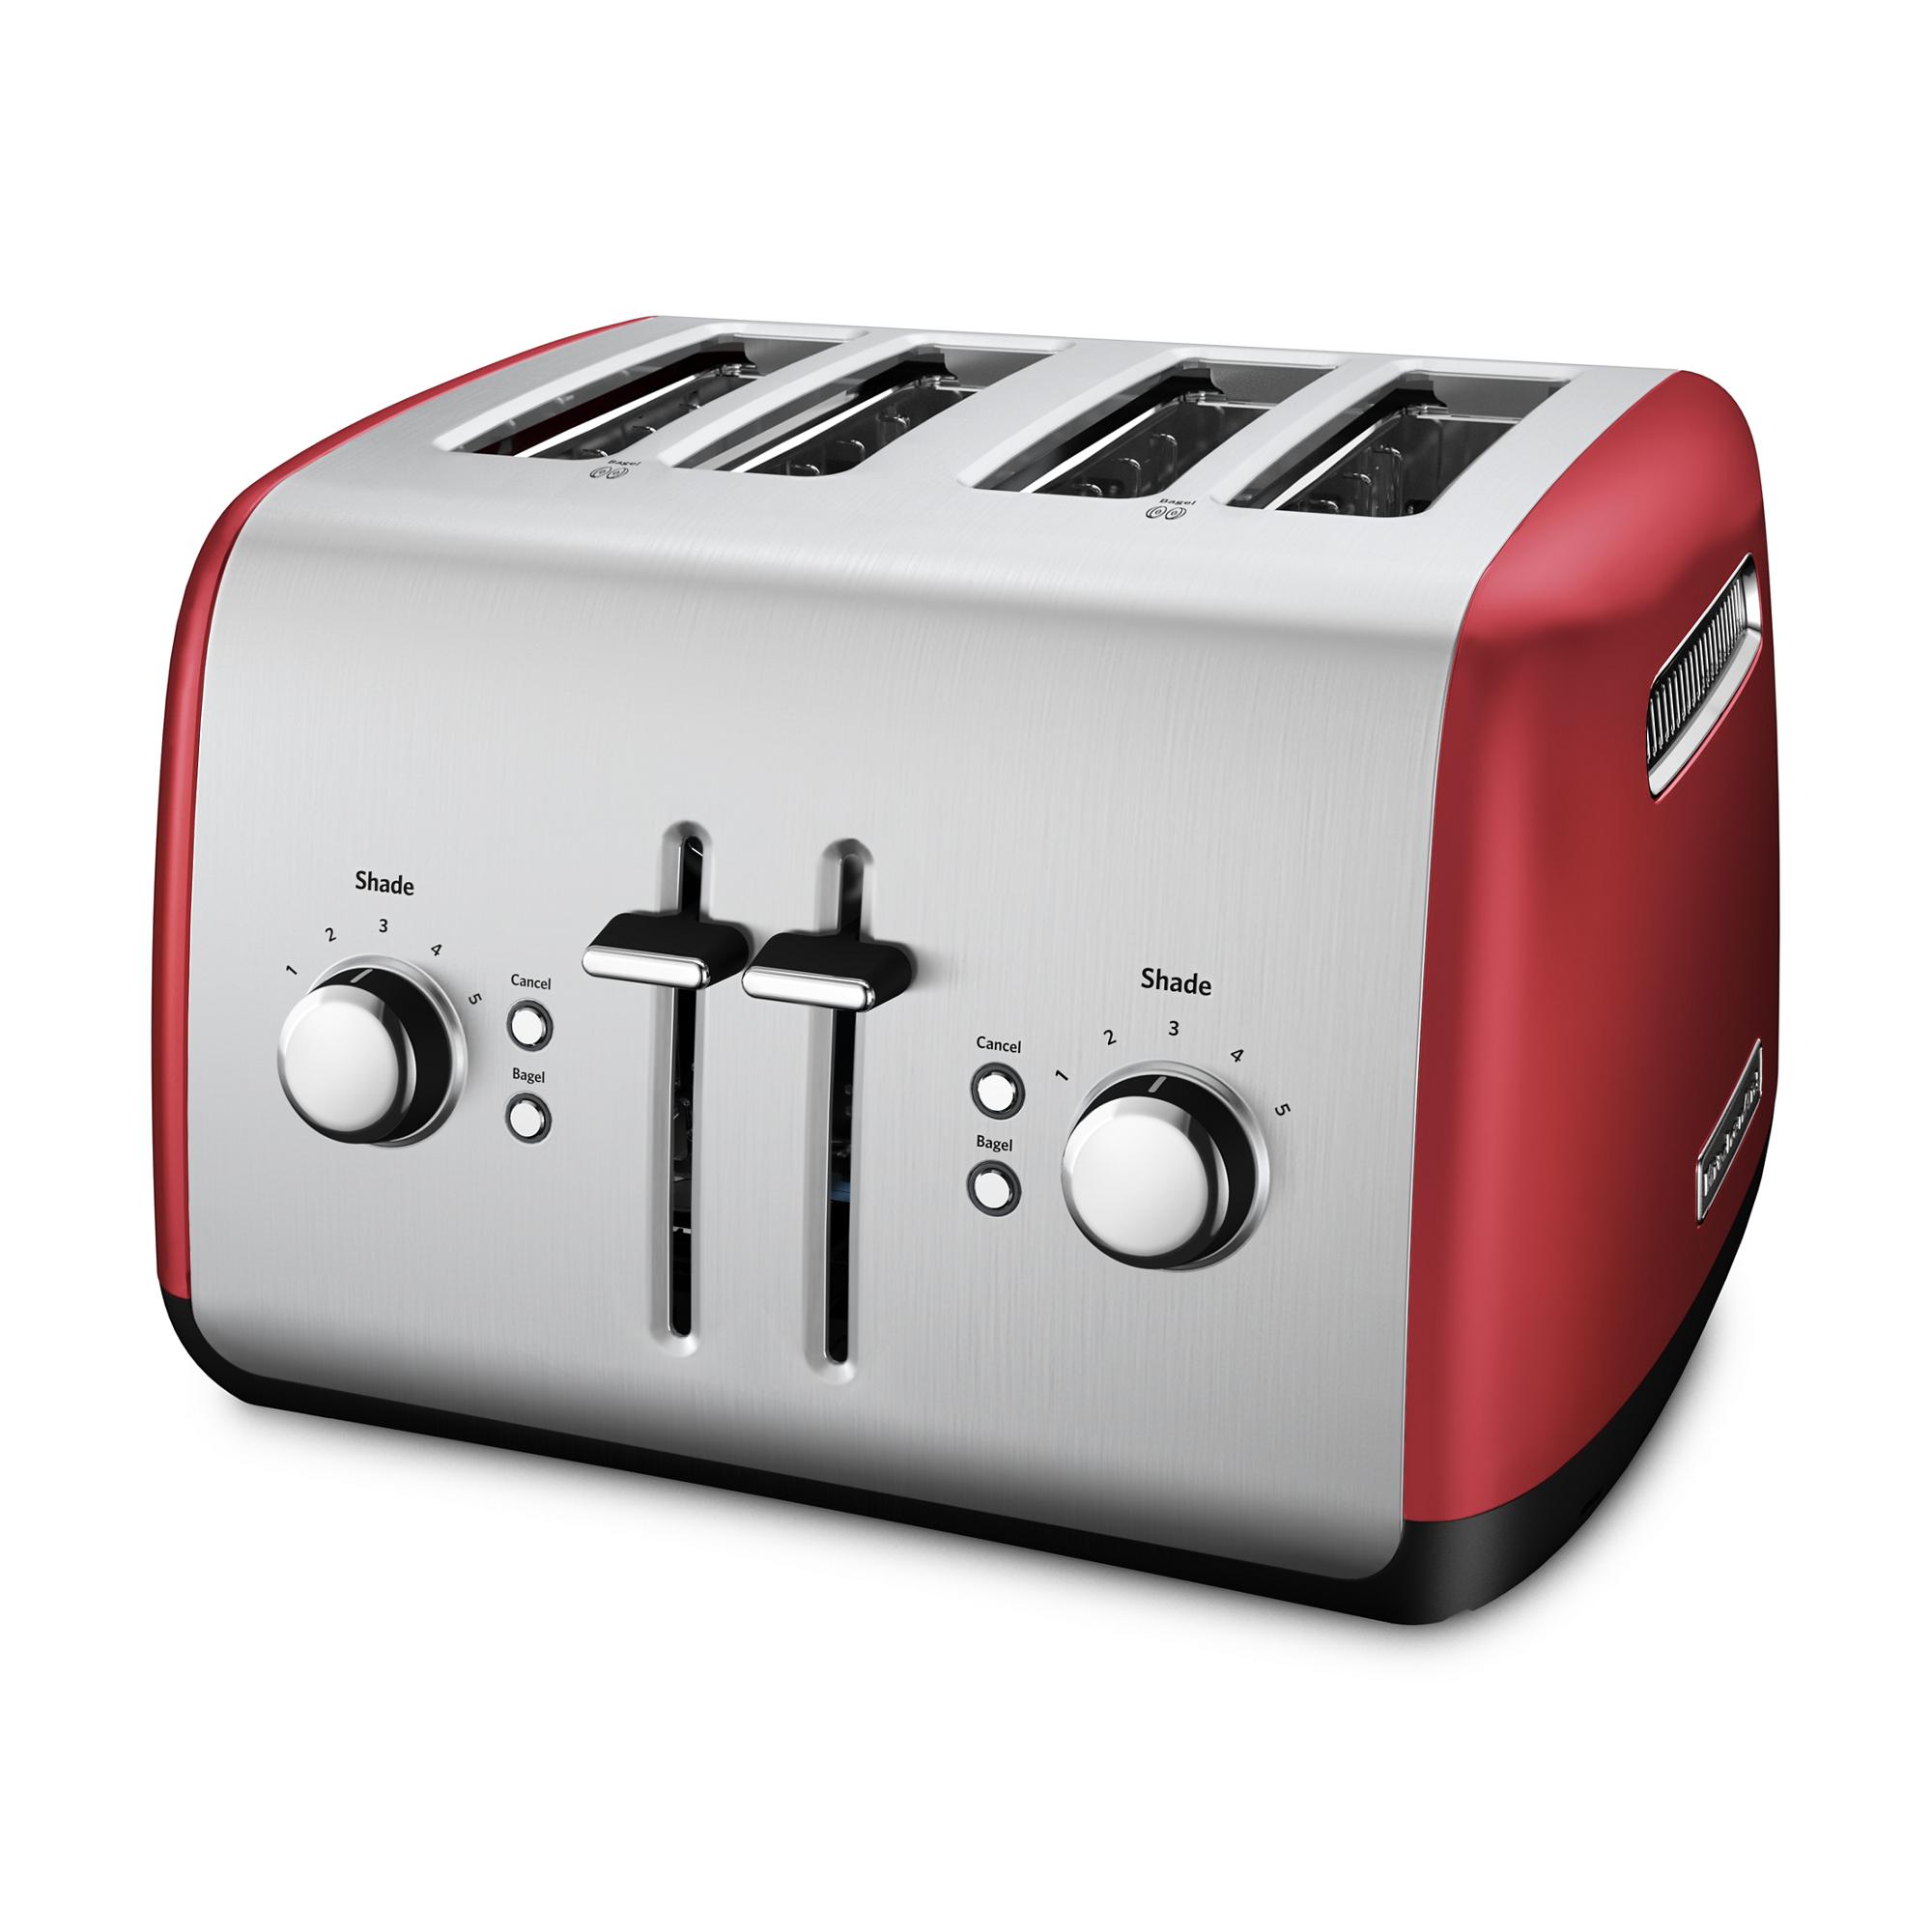 KitchenAid 4-Slice Red 1440-Watt Toaster in the department at Lowes.com